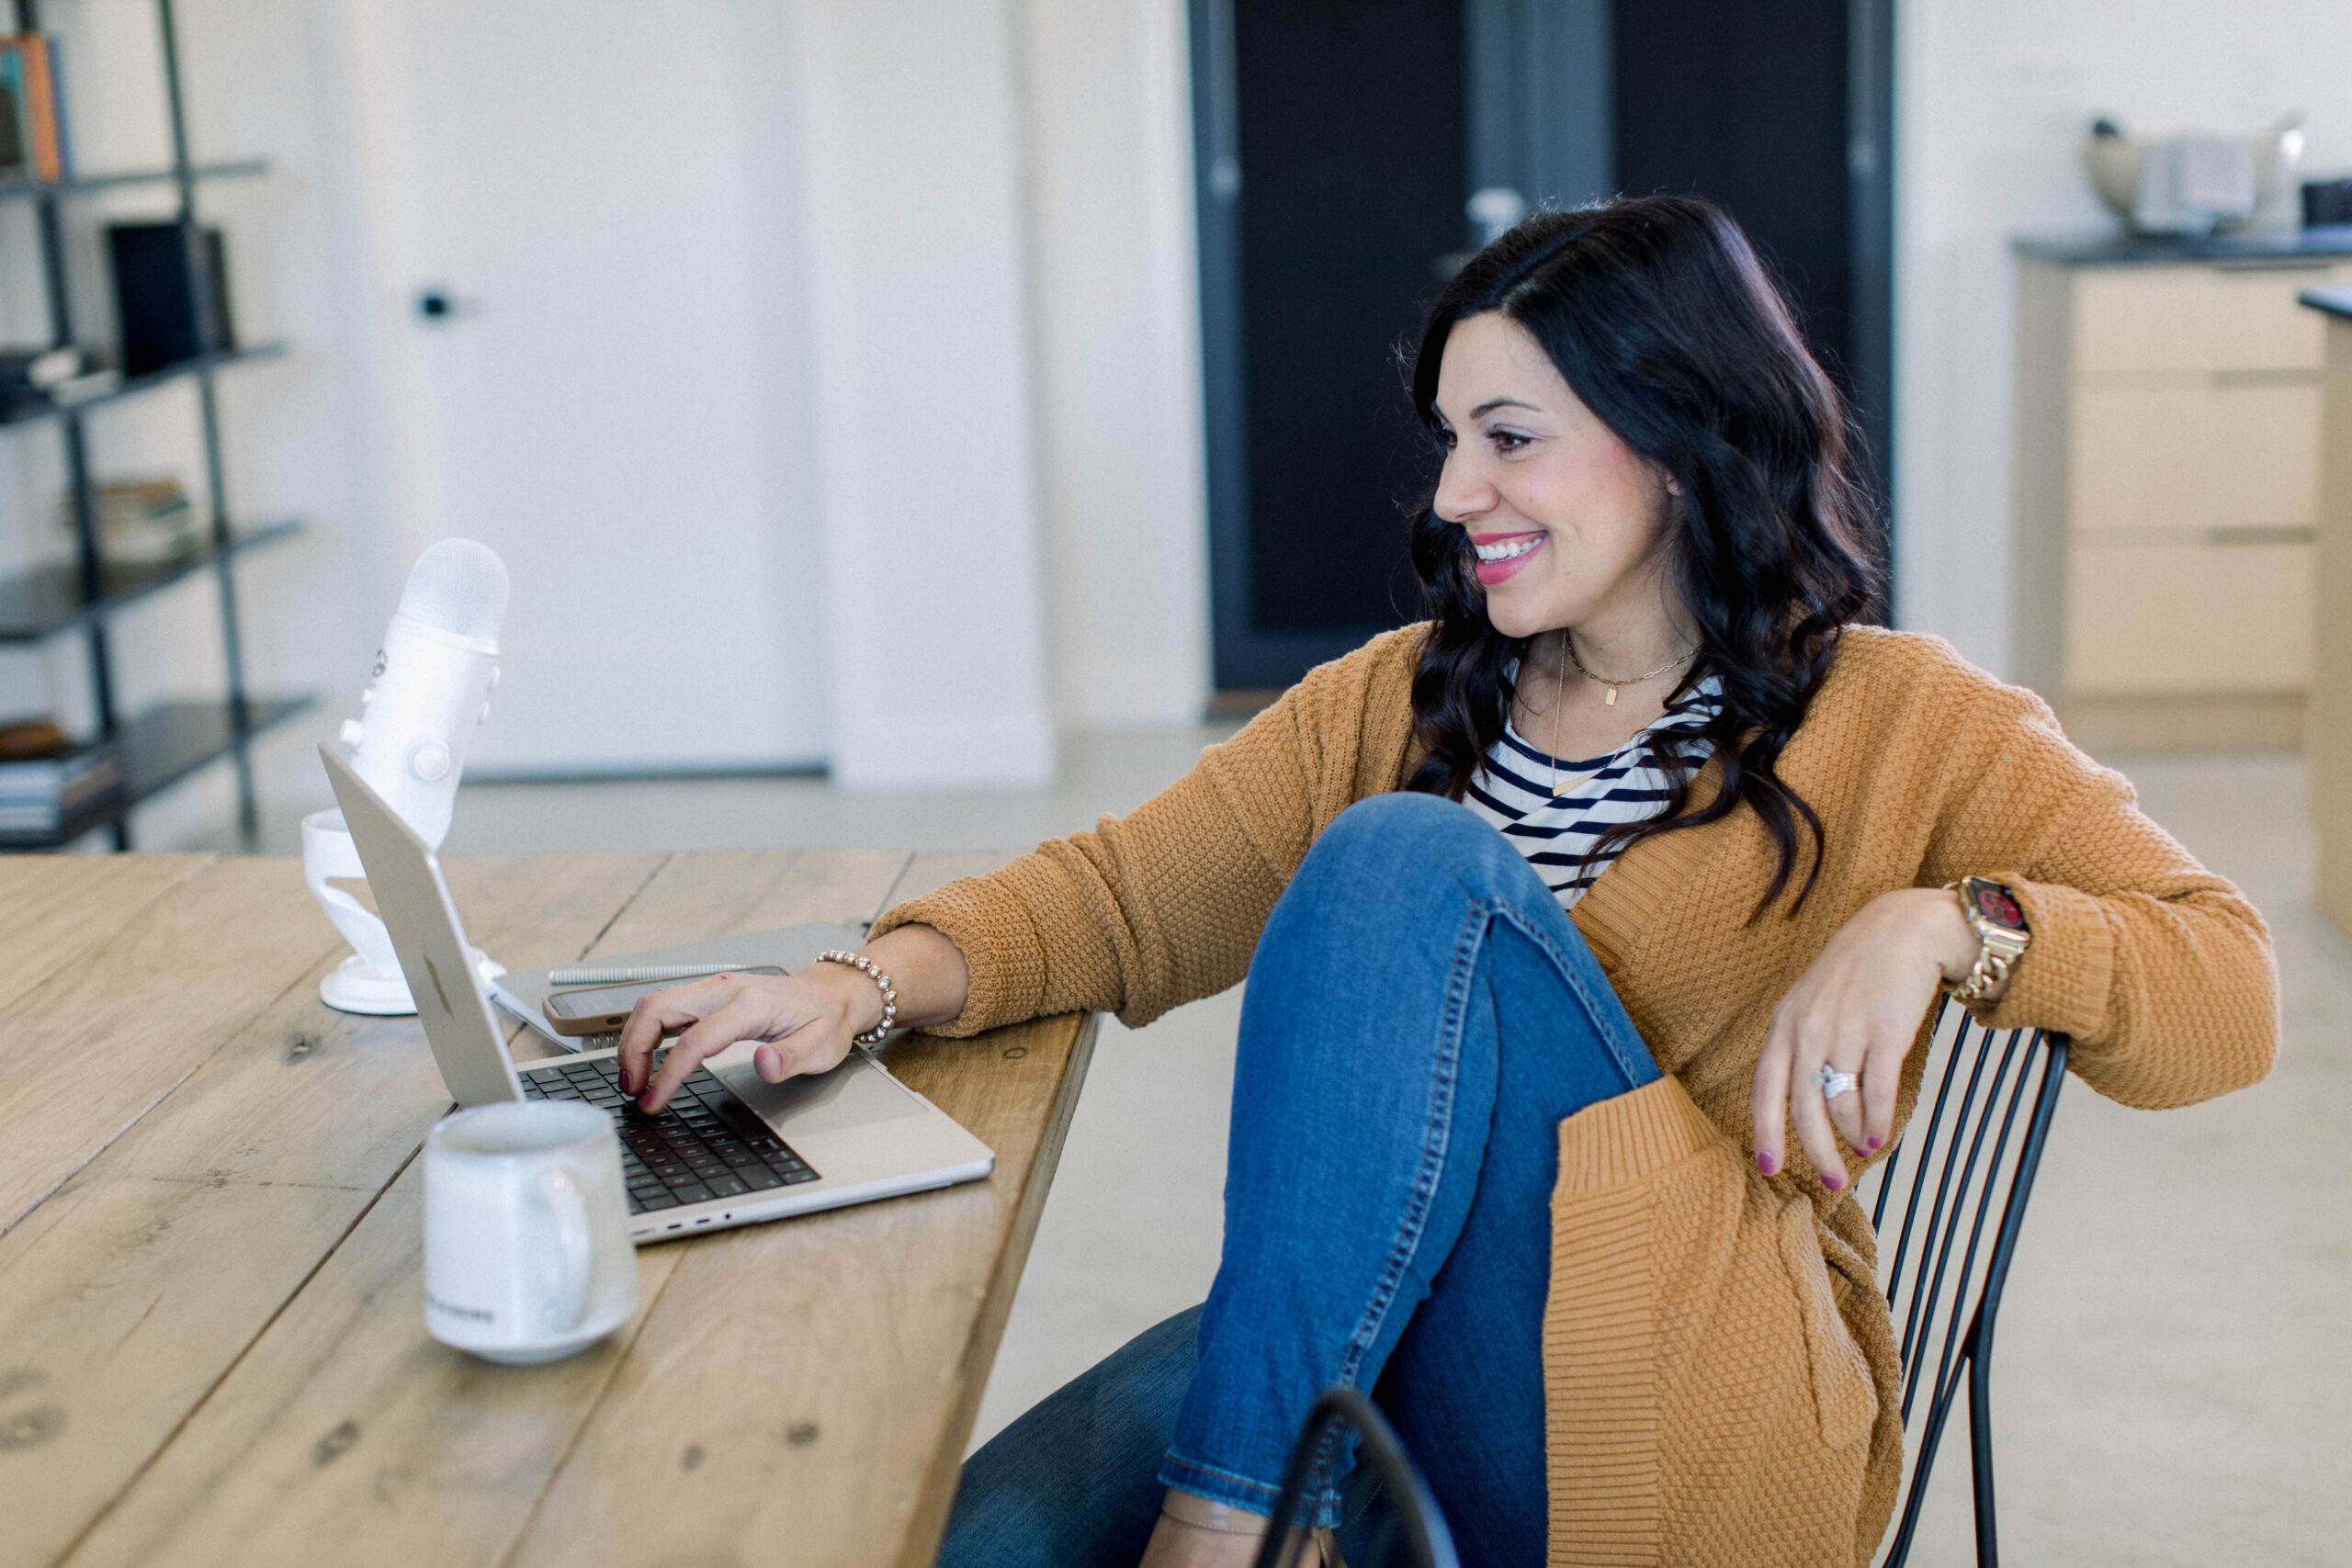 Brown haired woman sitting at desk with laptop, smiling, coffee mug, she's wearing a brown top with jeans